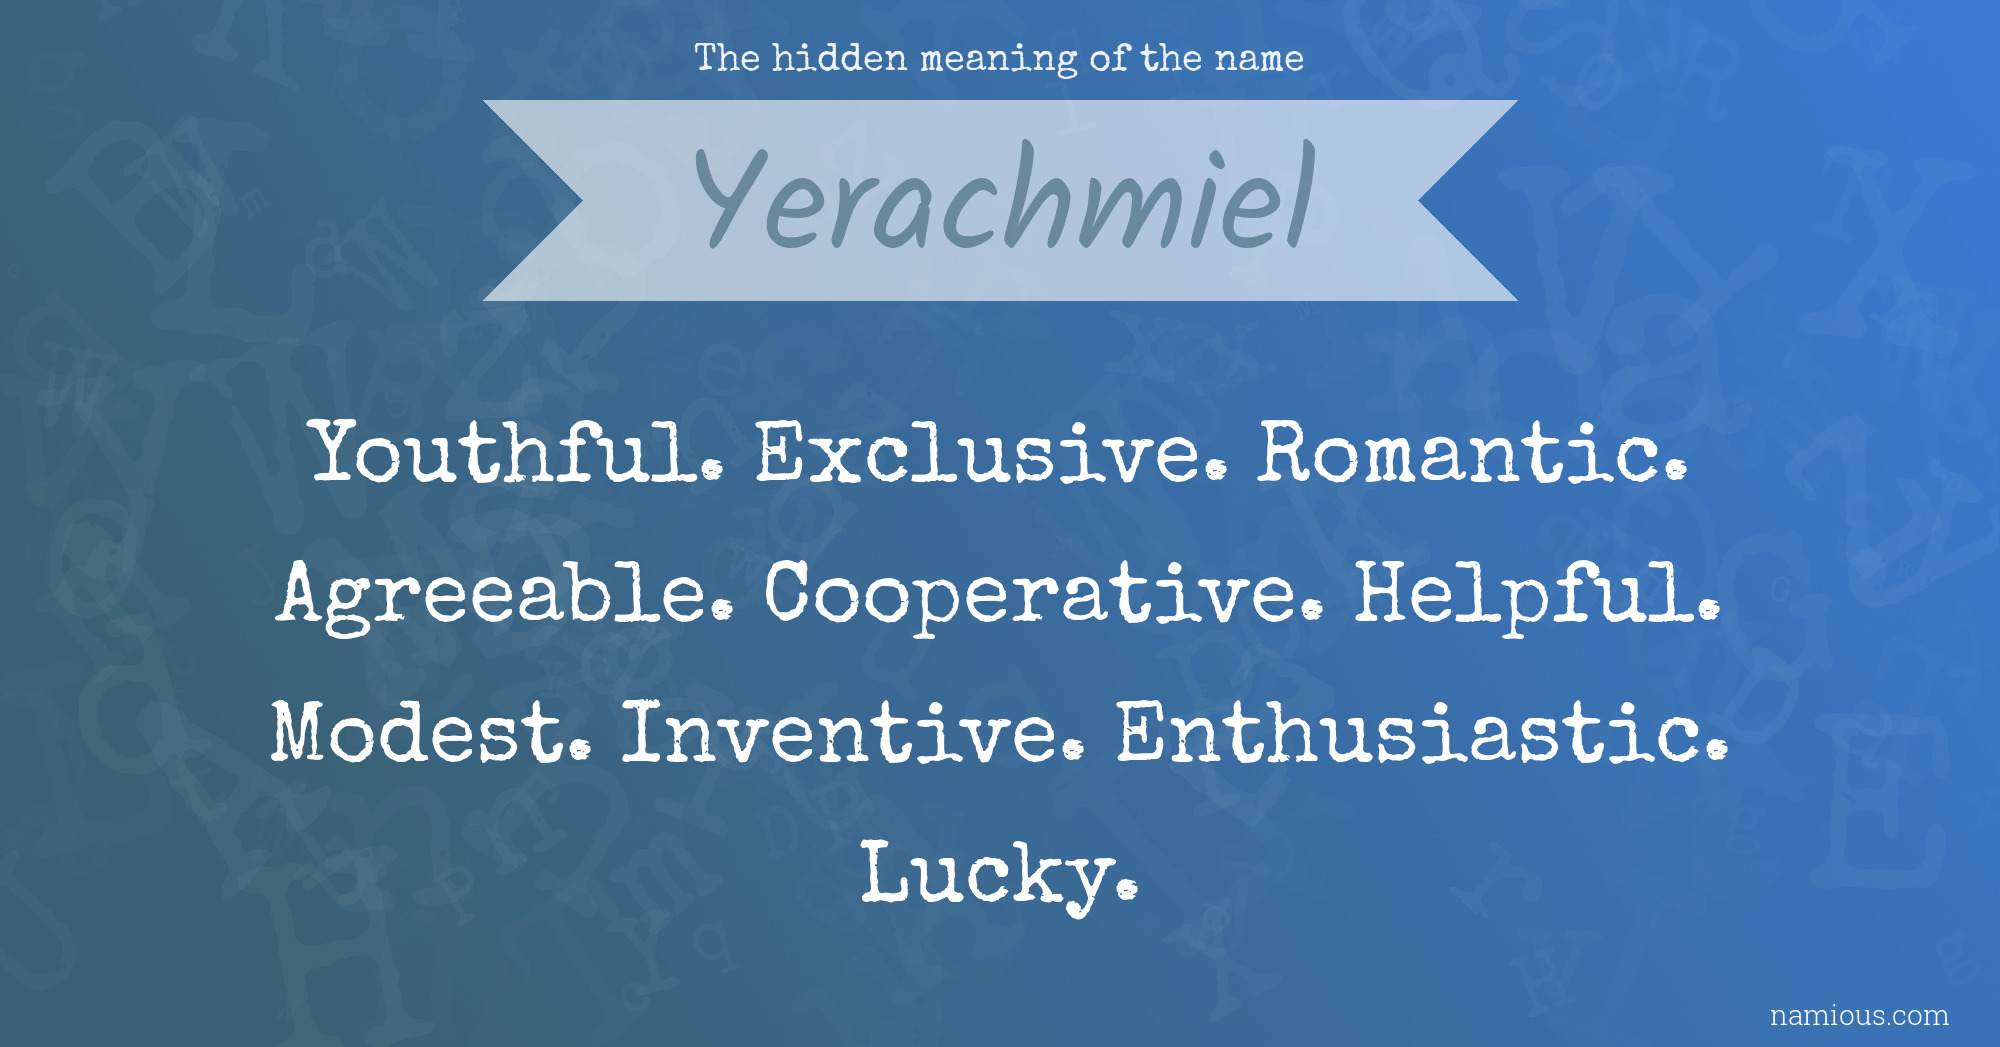 The hidden meaning of the name Yerachmiel